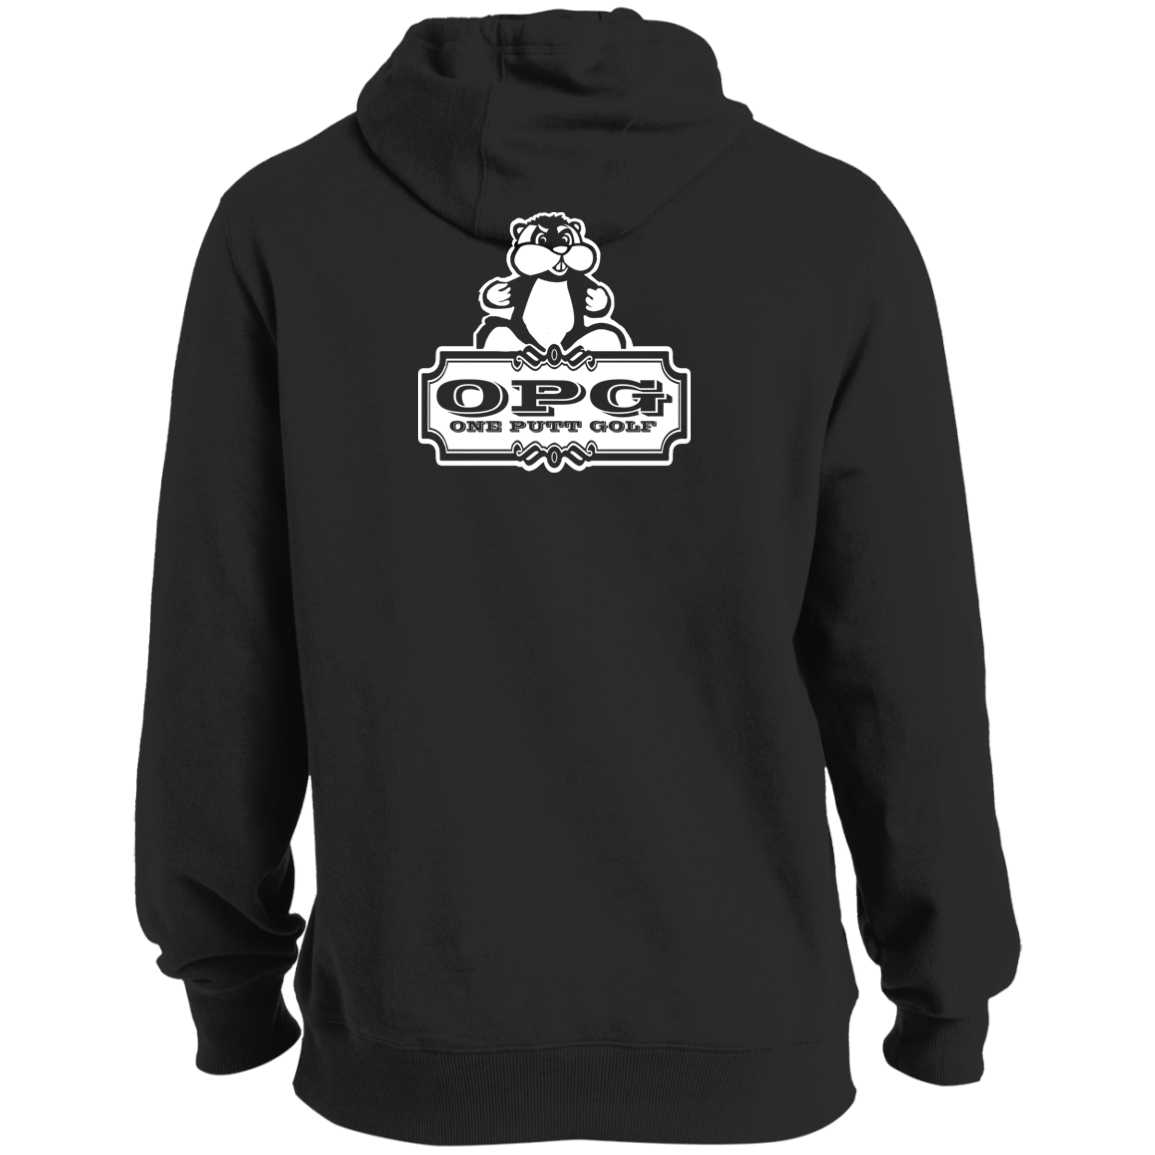 OPG Custom Design #29. Who's Your Caddy? Caddy Shack Bill Murray Fan Art. Tall Pullover Hoodie